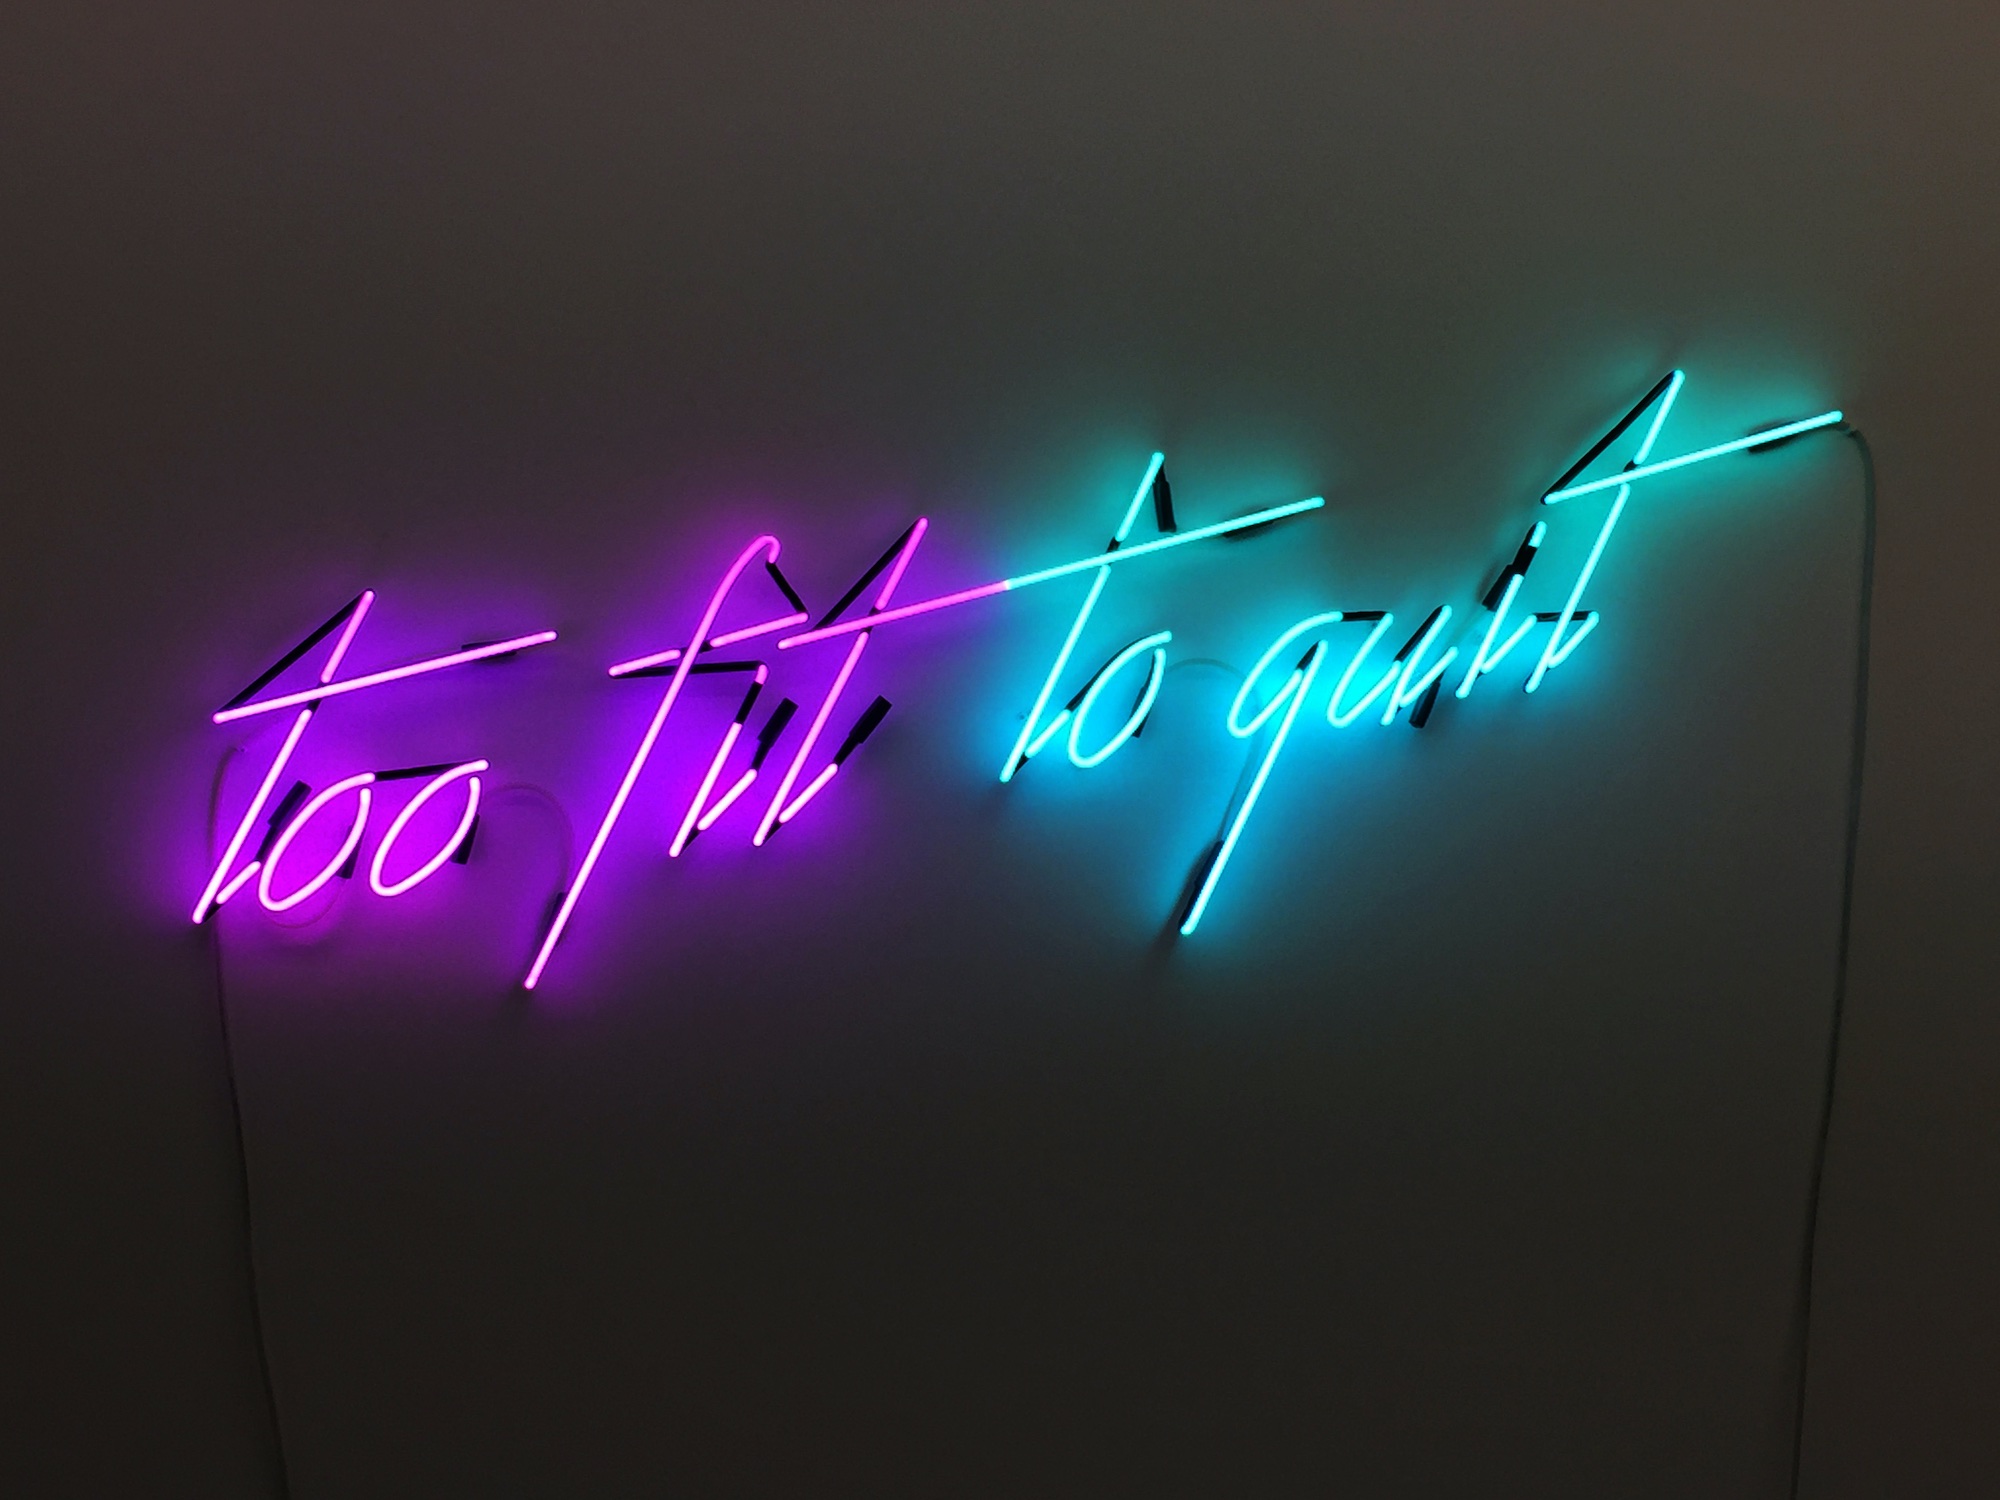 Min WONG   \'Too fit to quit\' 2017   neon lighting   Courtesy the artist